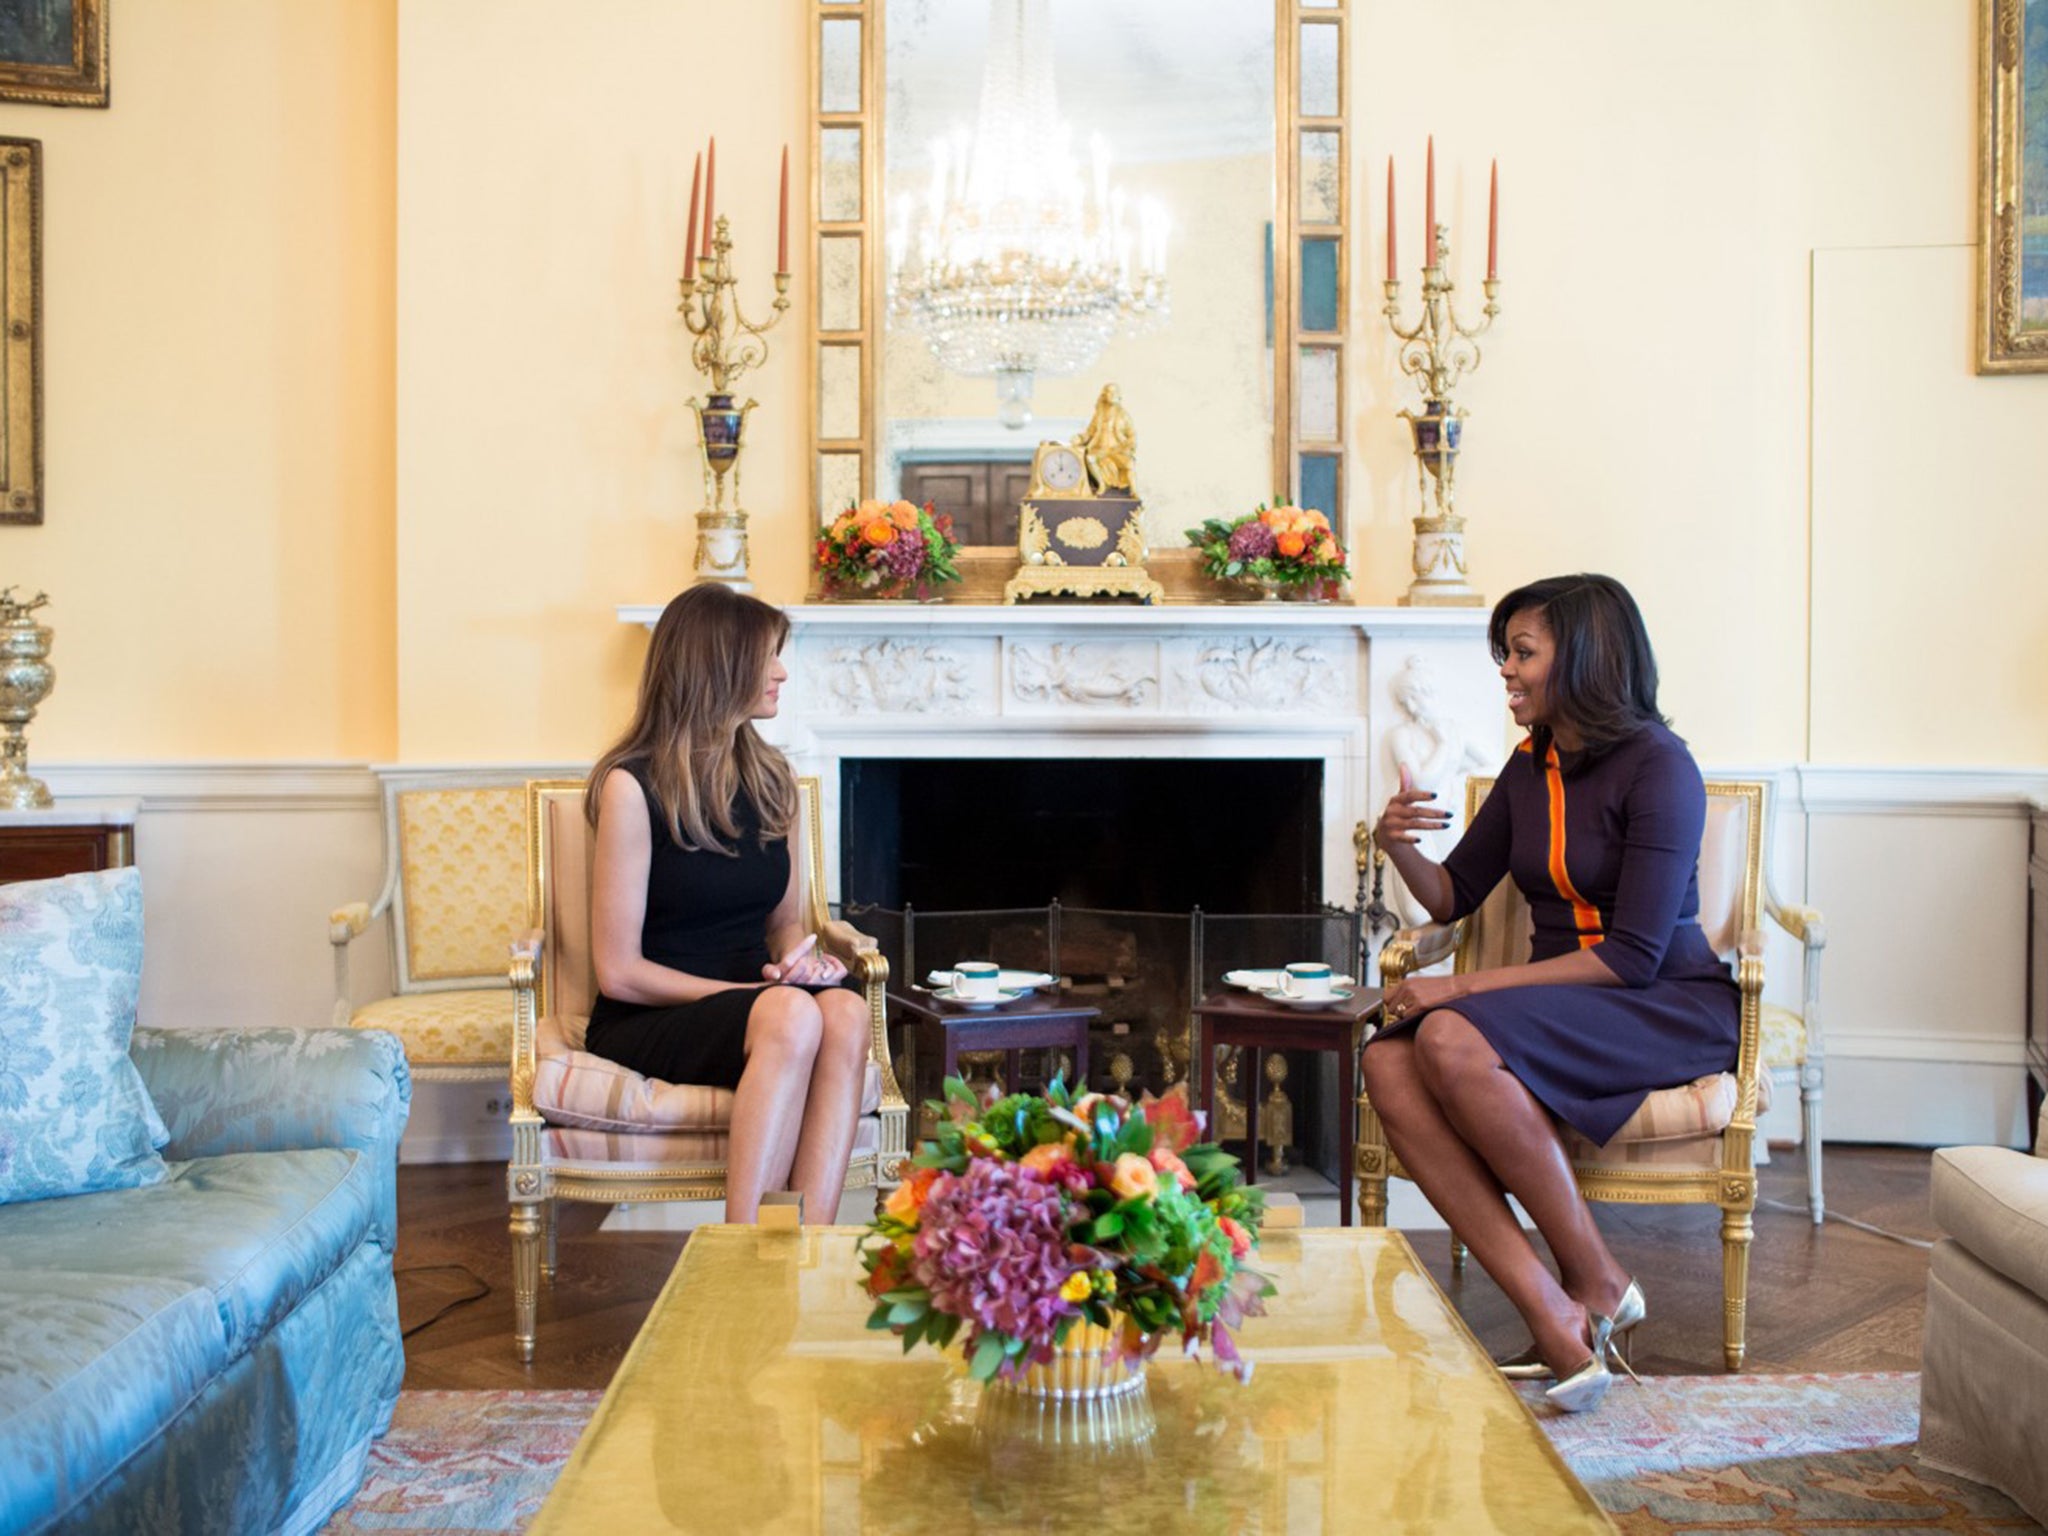 First Lady Michelle Obama meets with Melania Trump for tea in the Yellow Oval Room of the White House on November 10